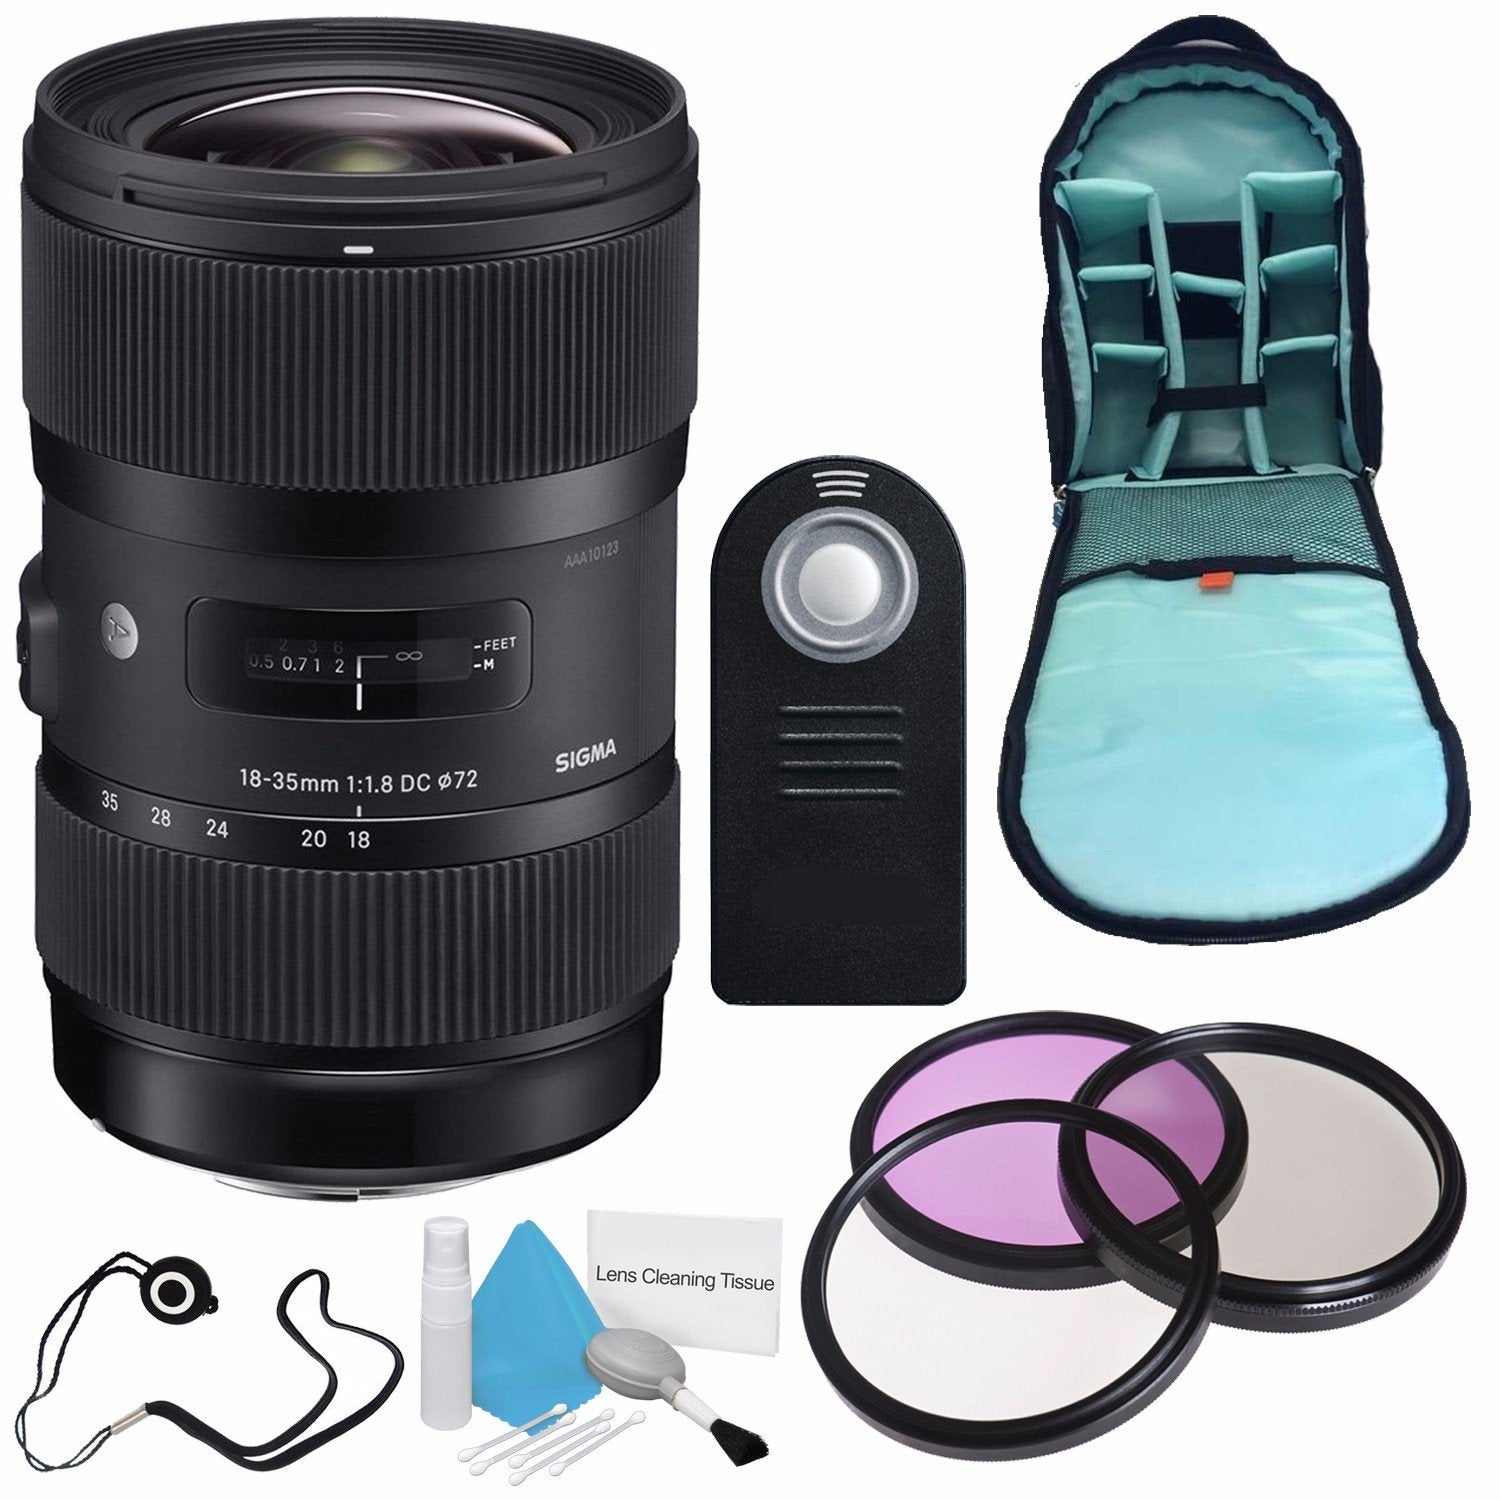 Sigma 18-35mm f/1.8 DC HSM Art Lens for Canon (International Model) + 72mm 3 Piece Filter Kit + Deluxe Cleaning Kit Advanced Bundle